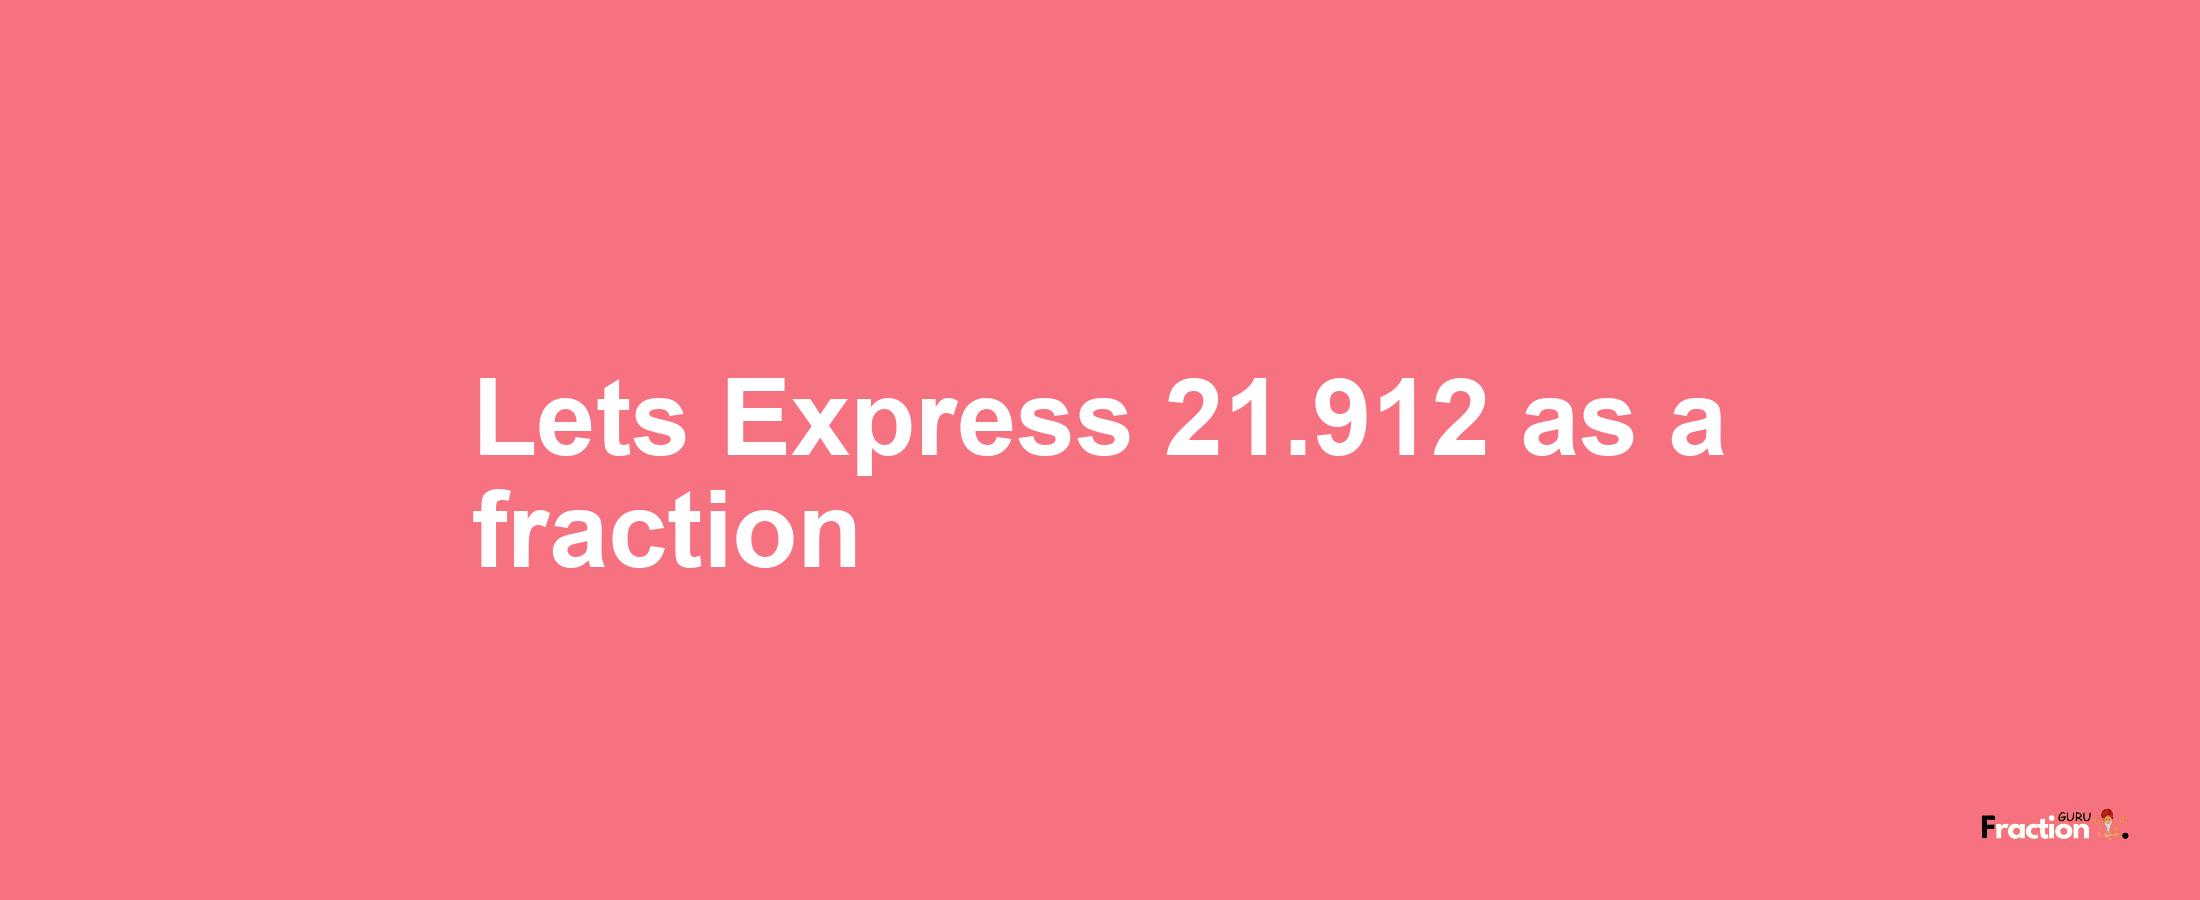 Lets Express 21.912 as afraction